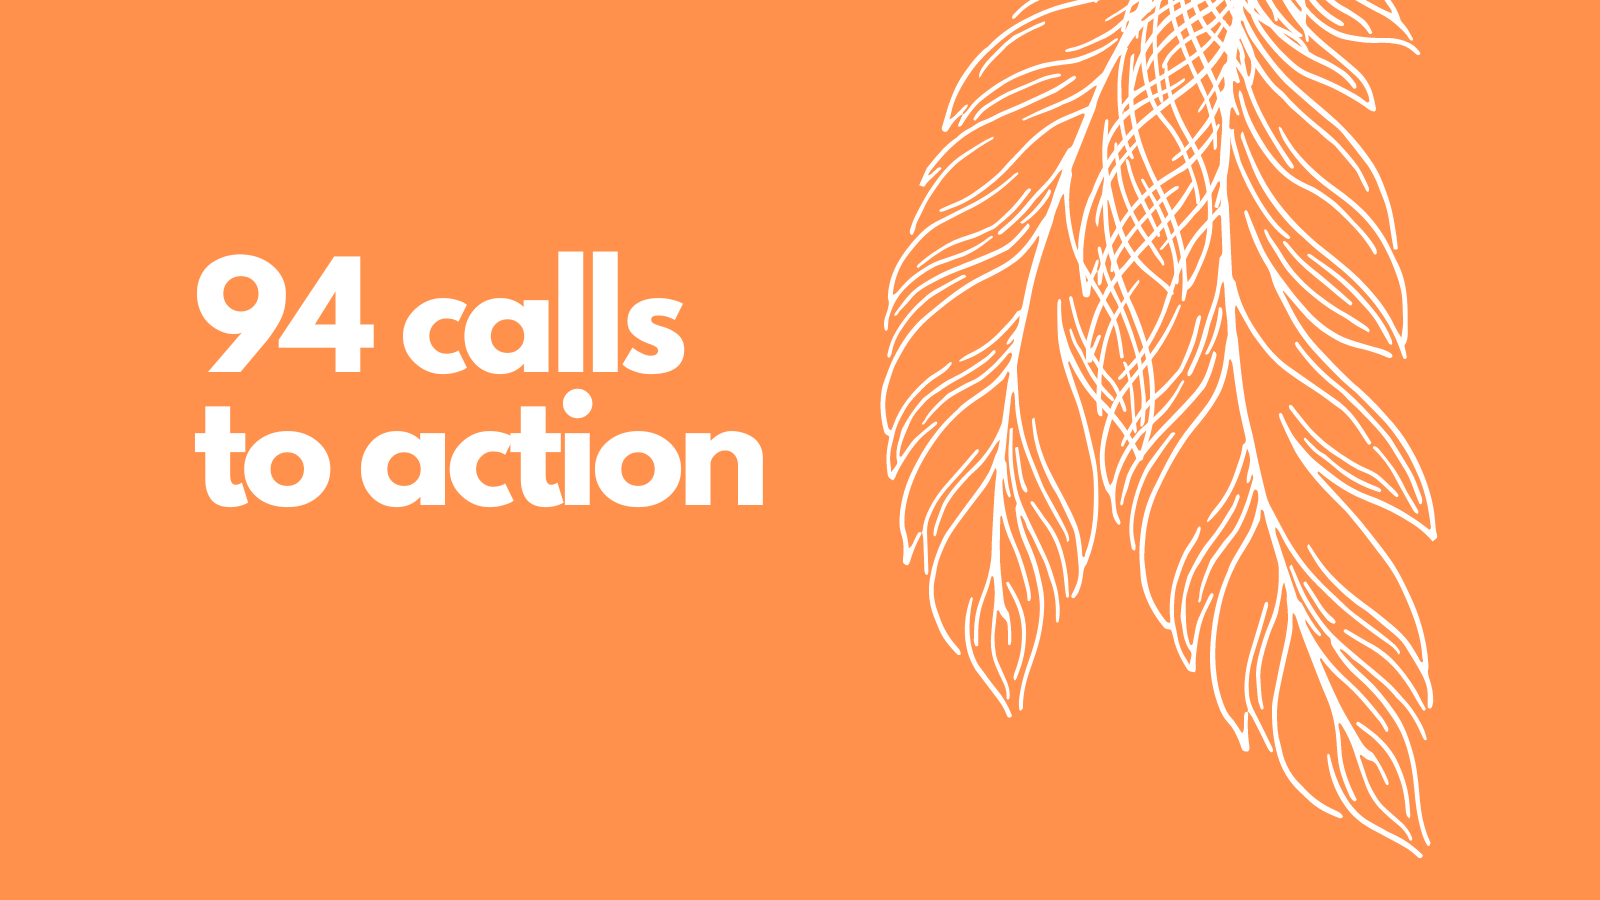 94 calls to action